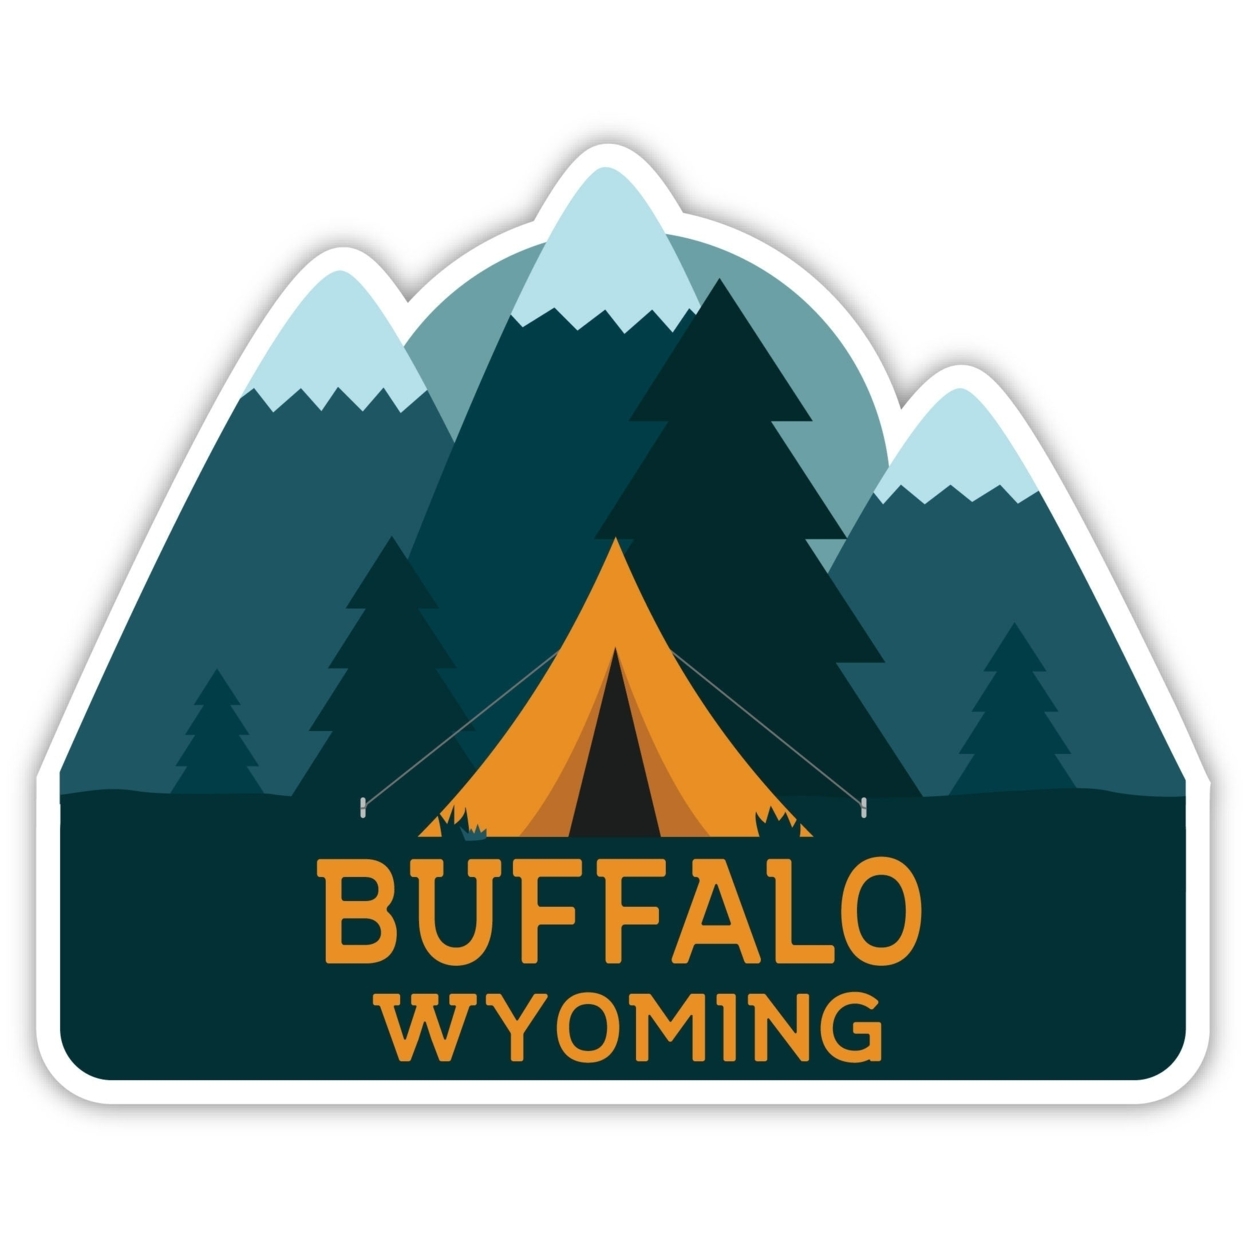 Buffalo Wyoming Souvenir Decorative Stickers (Choose Theme And Size) - Single Unit, 8-Inch, Adventures Awaits